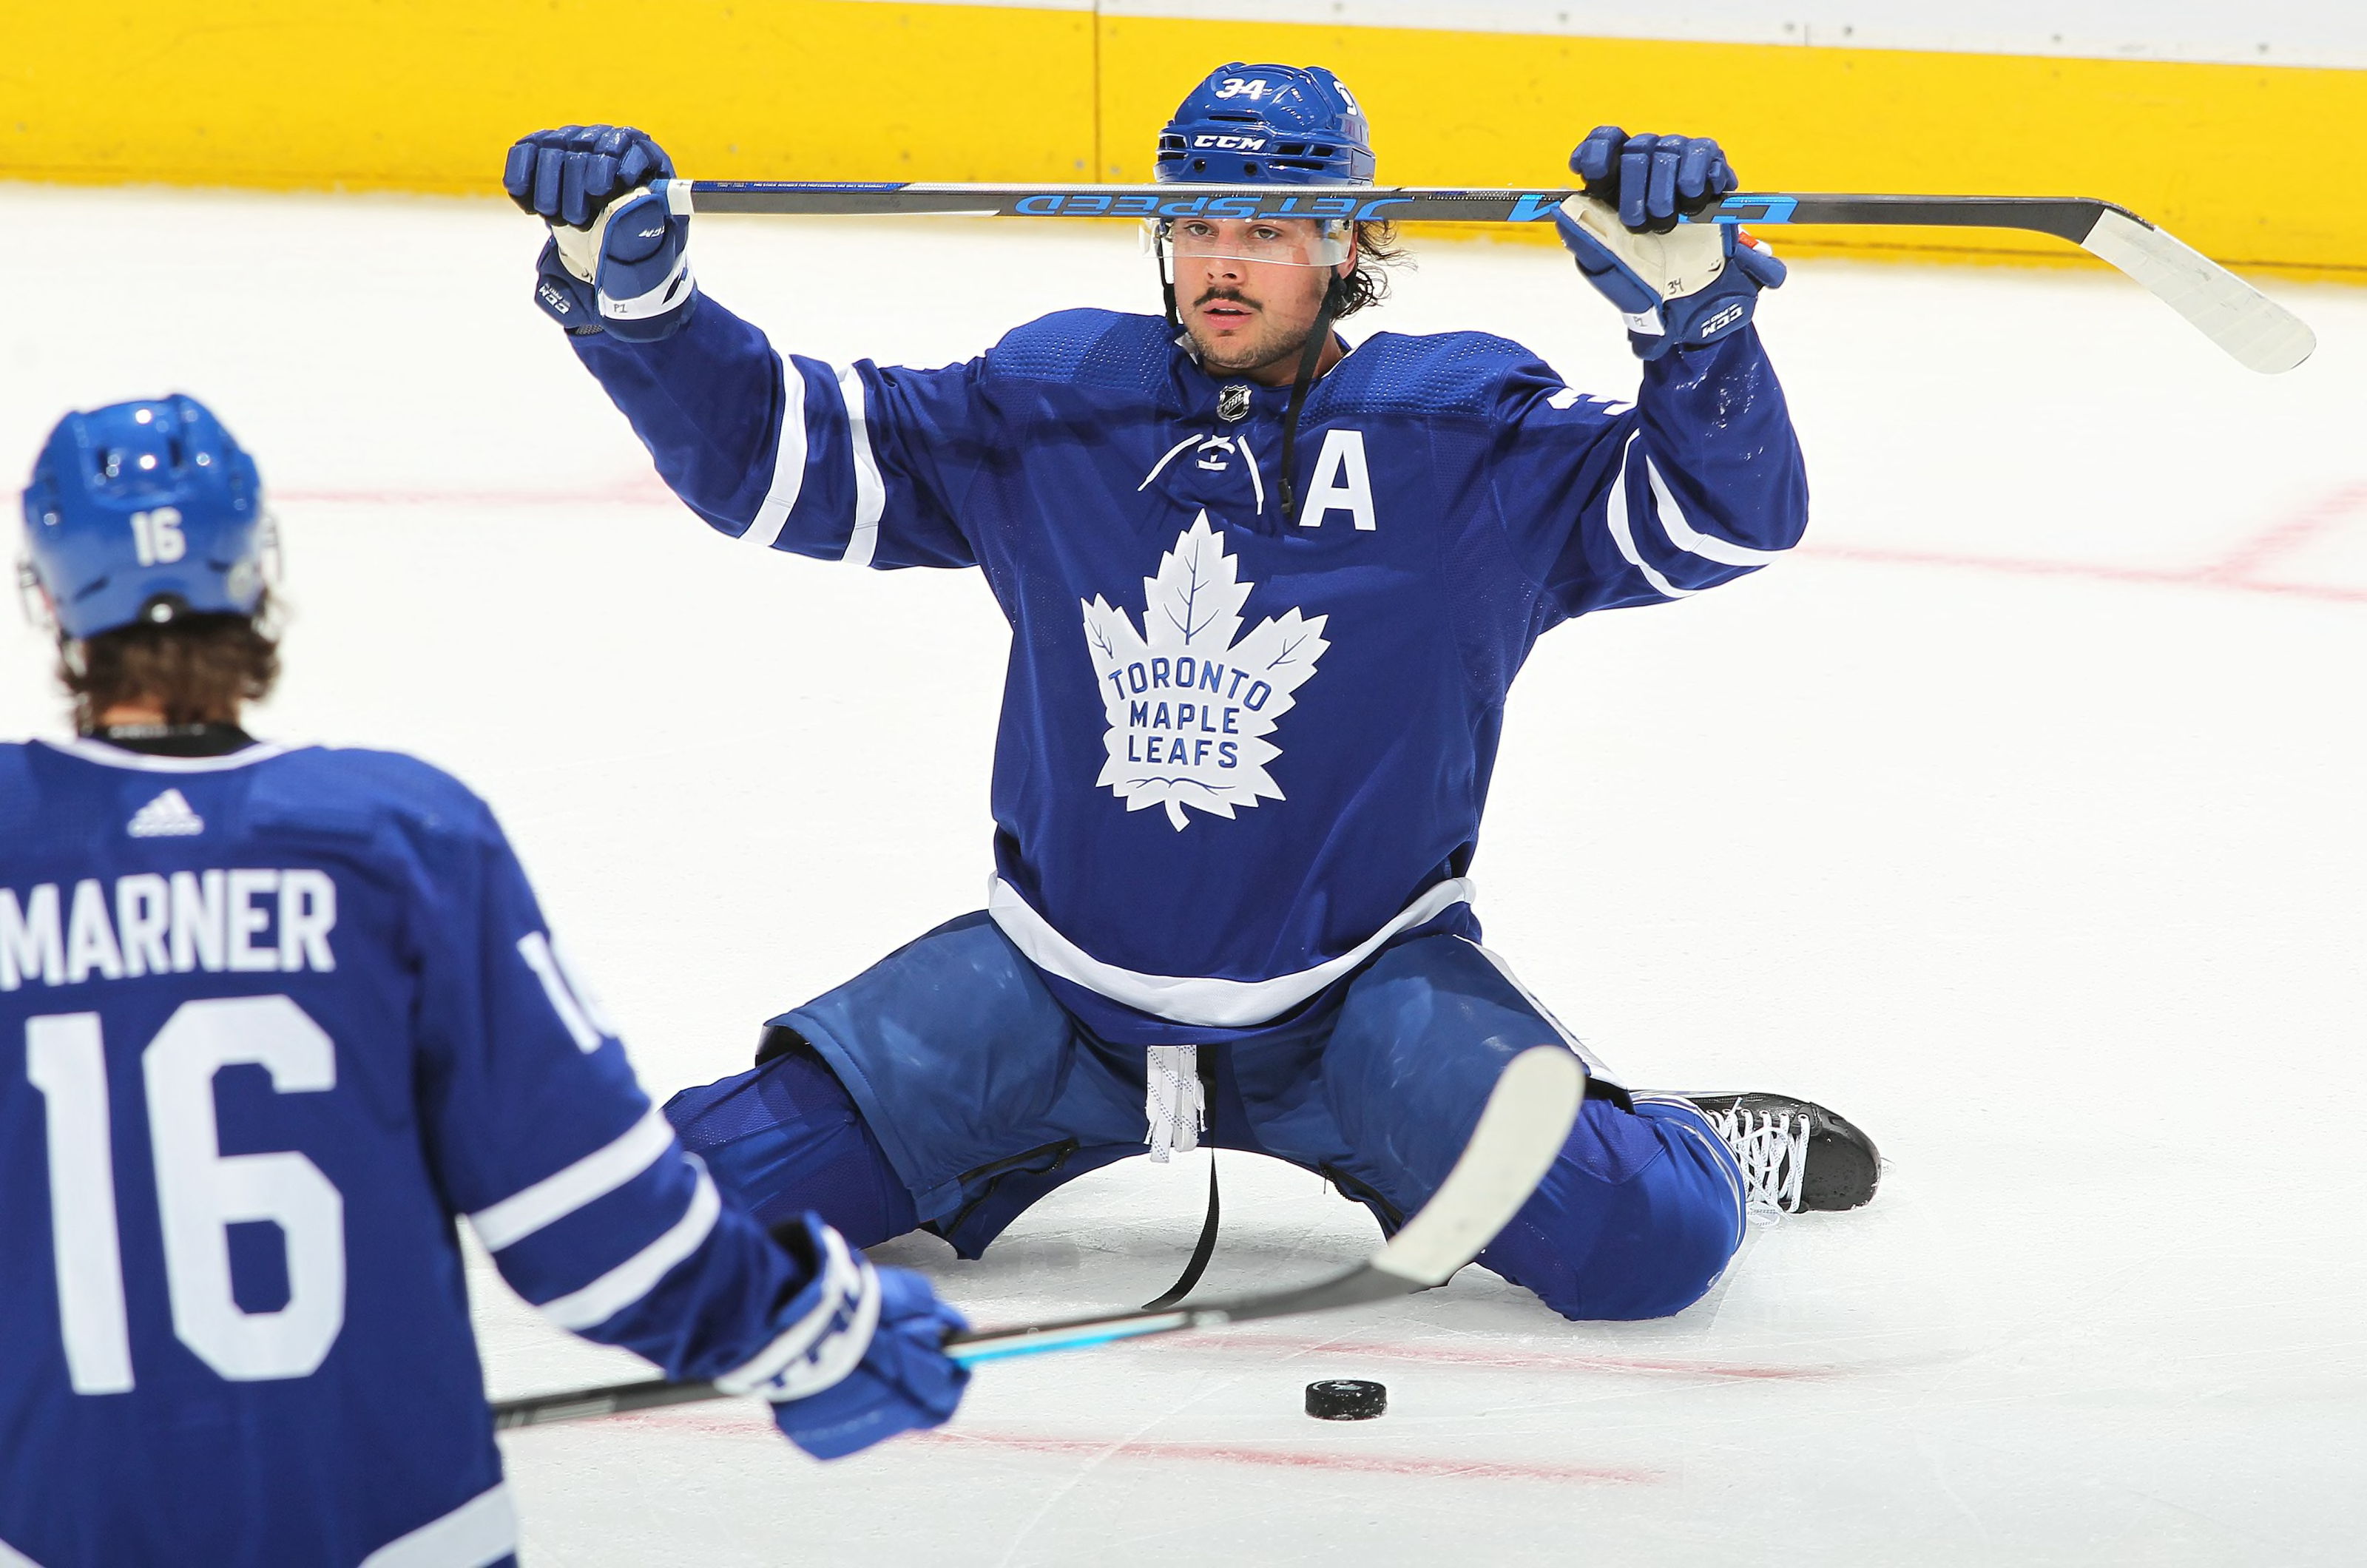 Maple Leafs highlight Saturday NHL odds as favourites to win